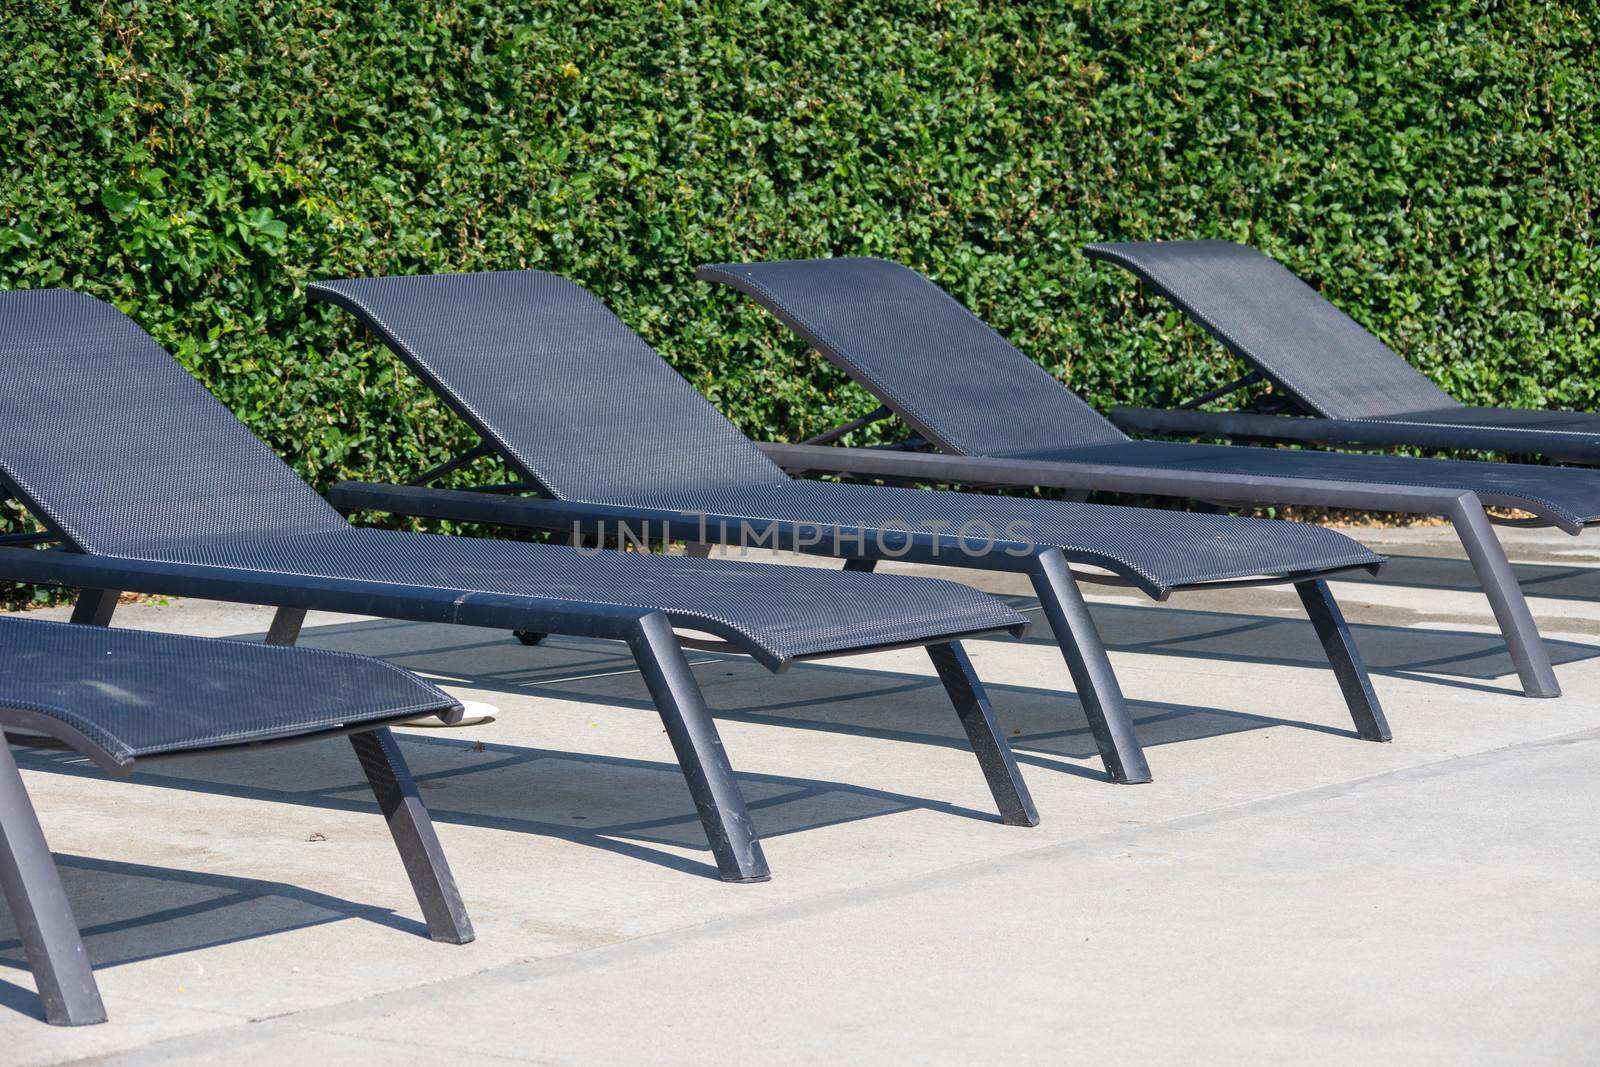 A row of empty pool chairs for lying down with a green background on a sunny day.